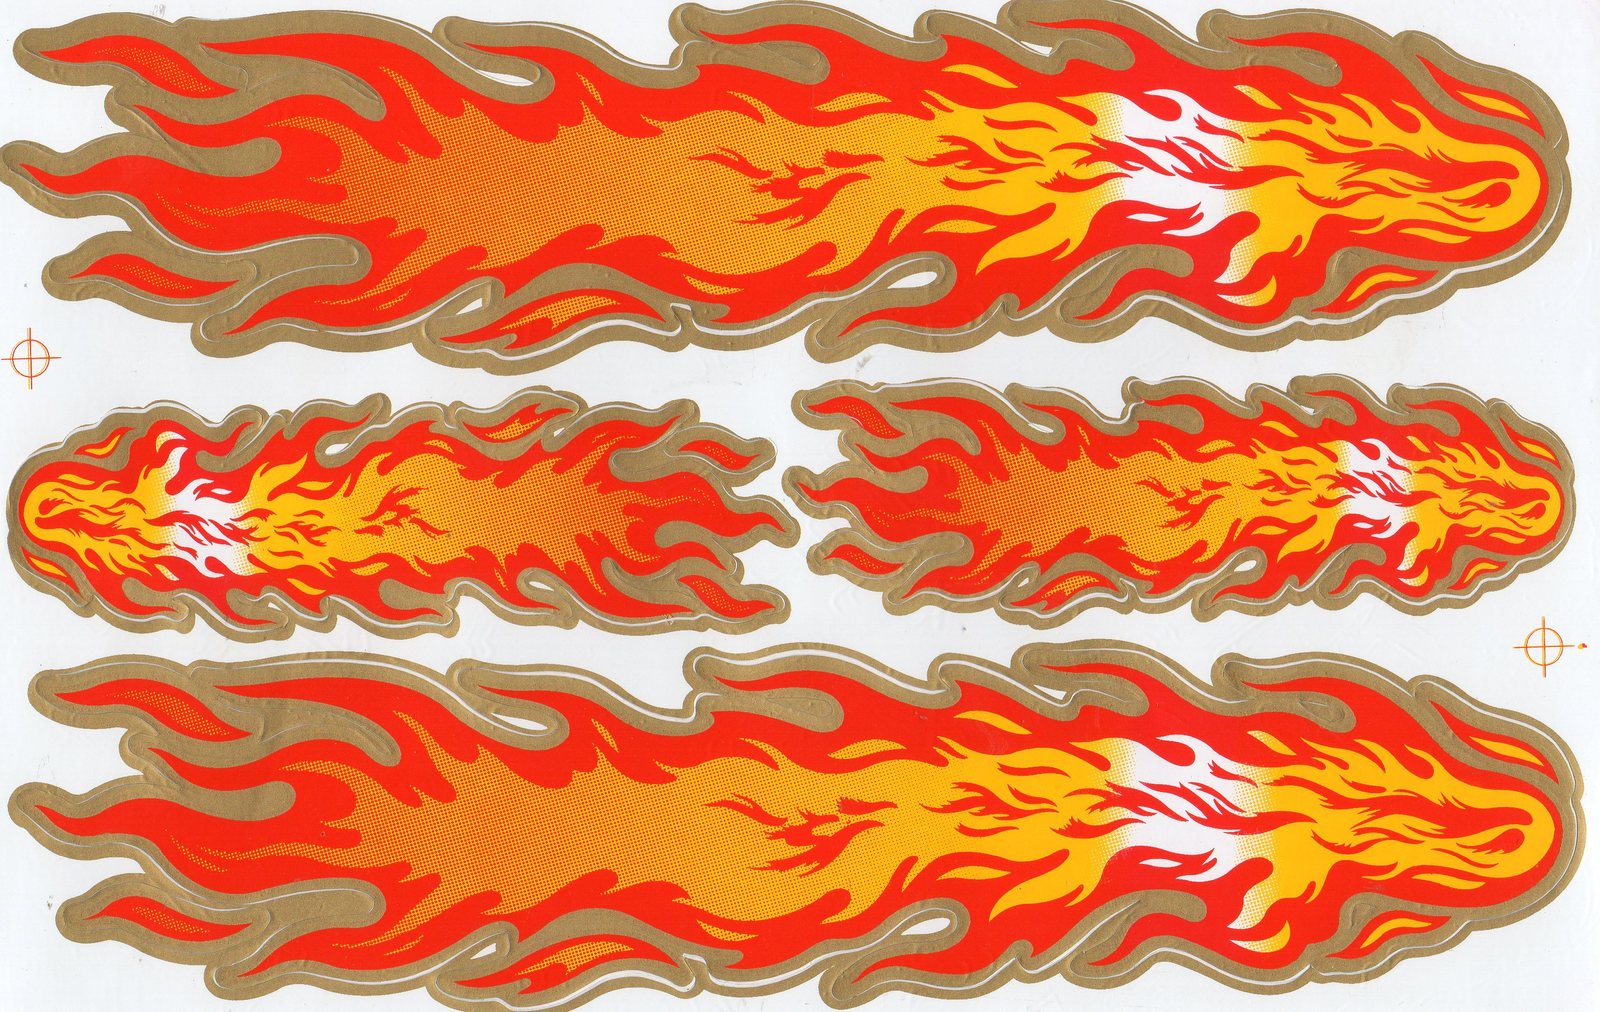 Primary image for D057 Flame Fire orange Sticker Decal Racing Tuning Size 27x18 cm / 10x7 inch